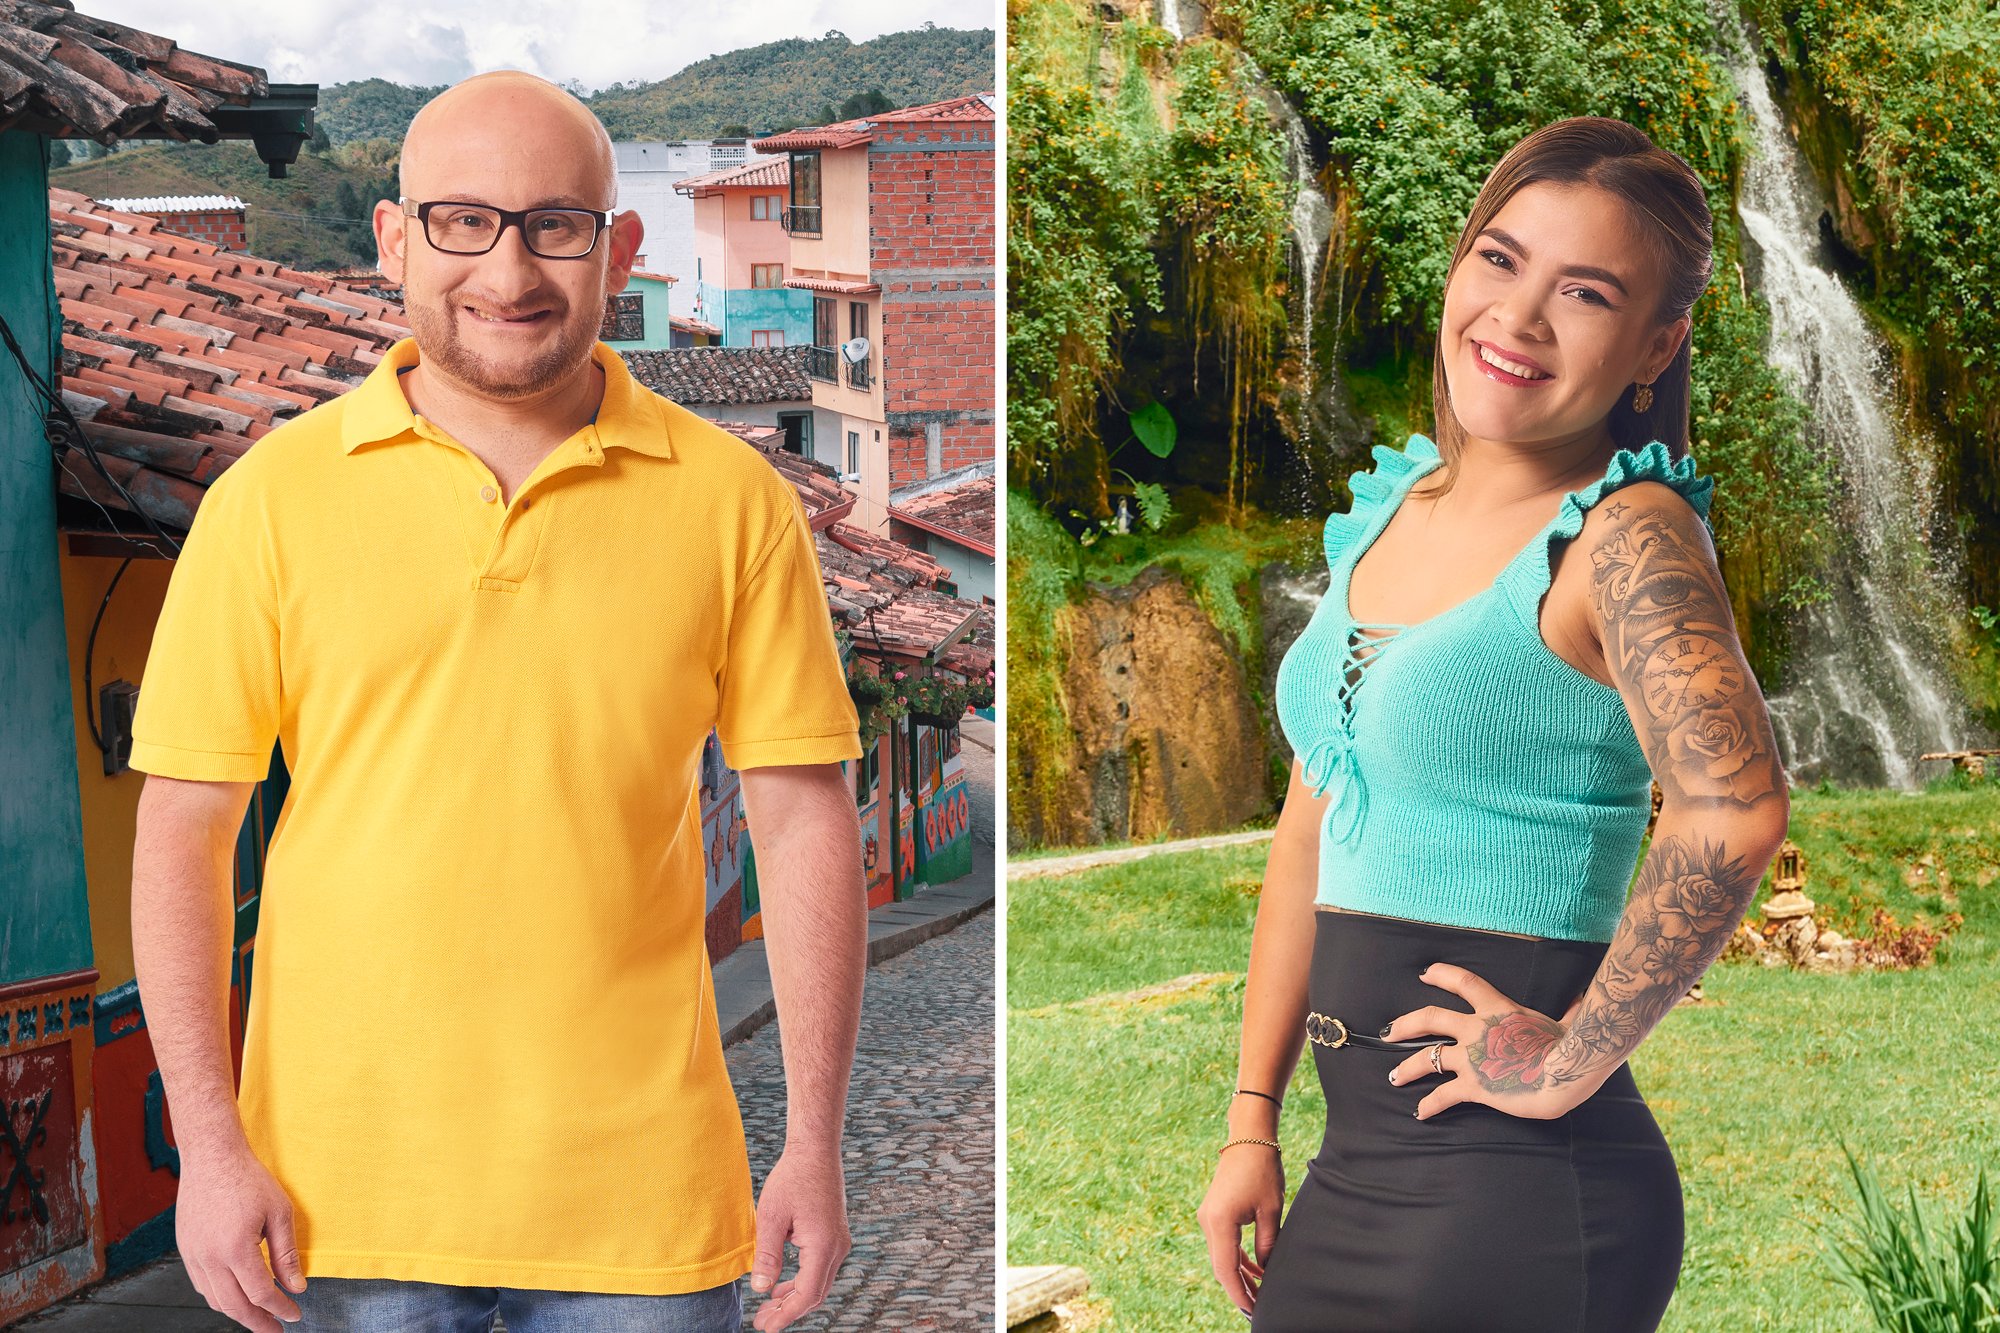 'Before the 90 Days' Season 5 stars Mike and Ximena. Mike is wearing a yellow collared shirt while Ximena poses in light blue tank top and black skirt.